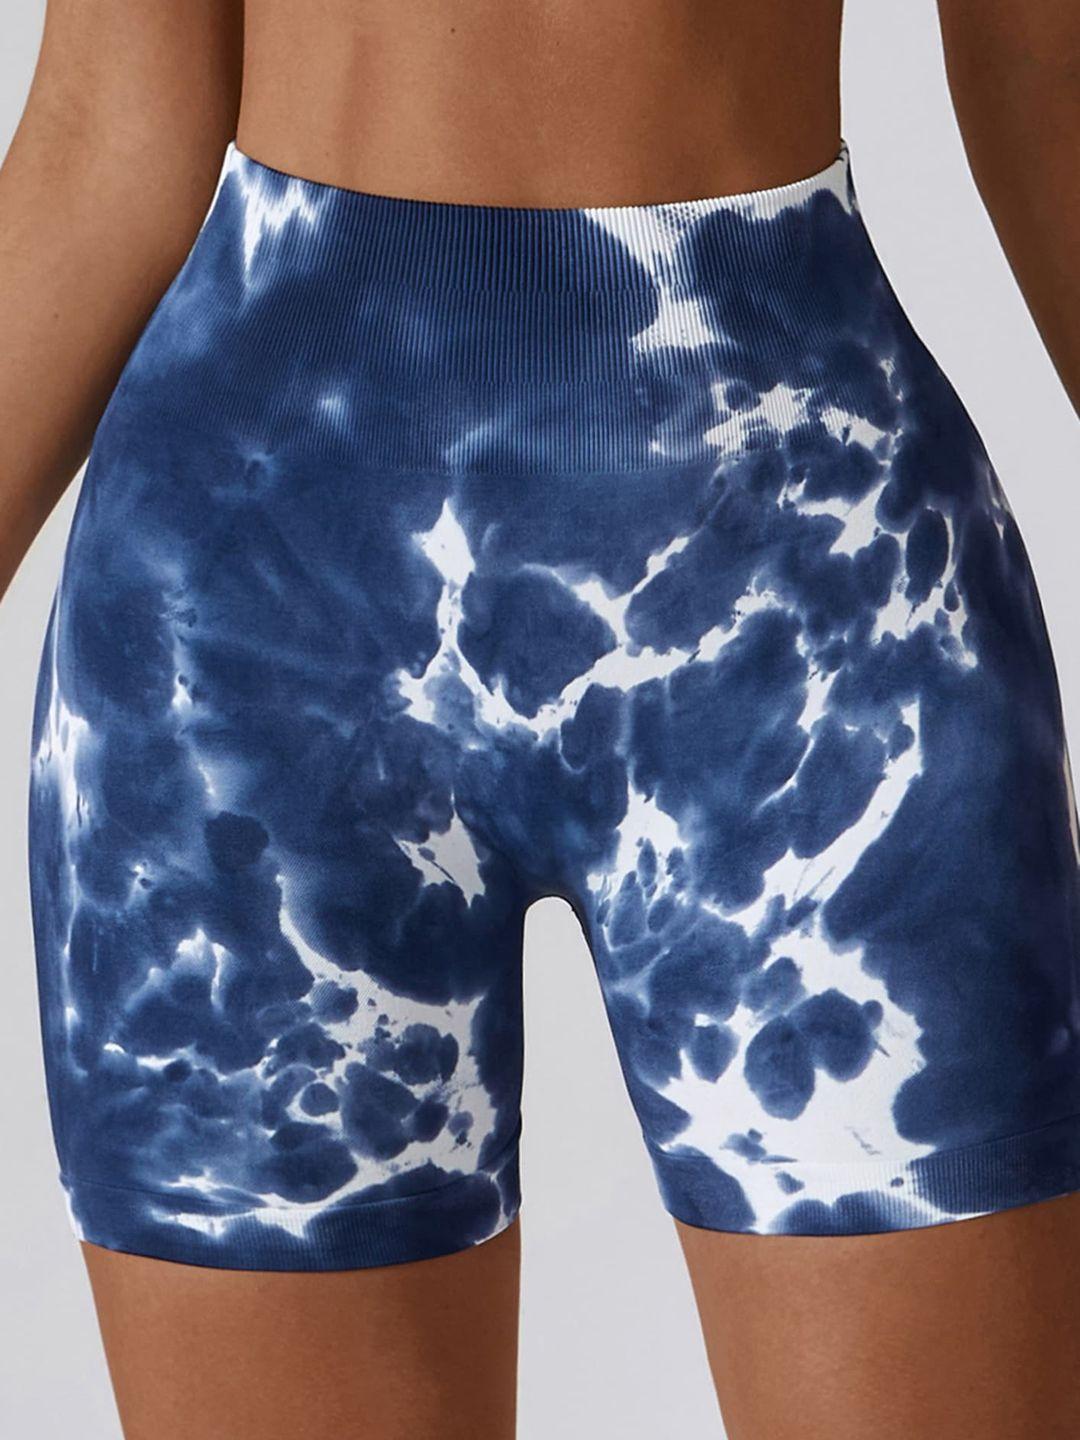 lulu & sky abstract printed slim fit high-rise yoga sports shorts